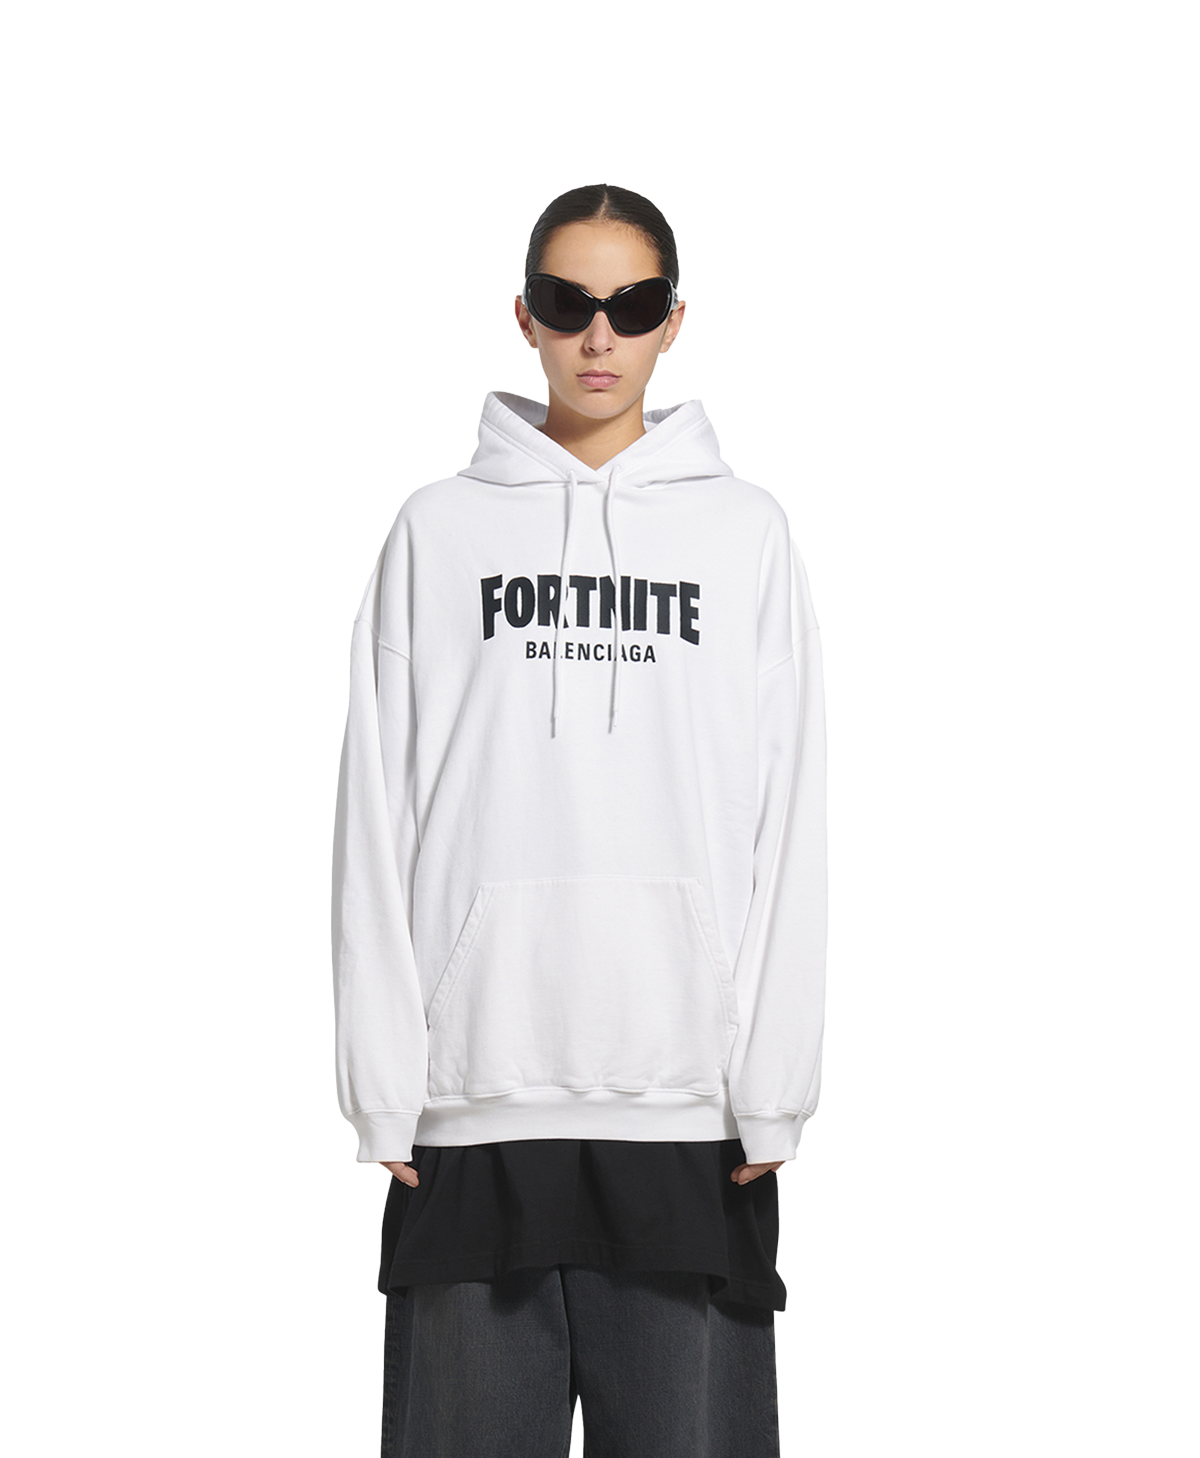 Balenciaga takes fashion to Fortnite in an in-game and IRL crossover